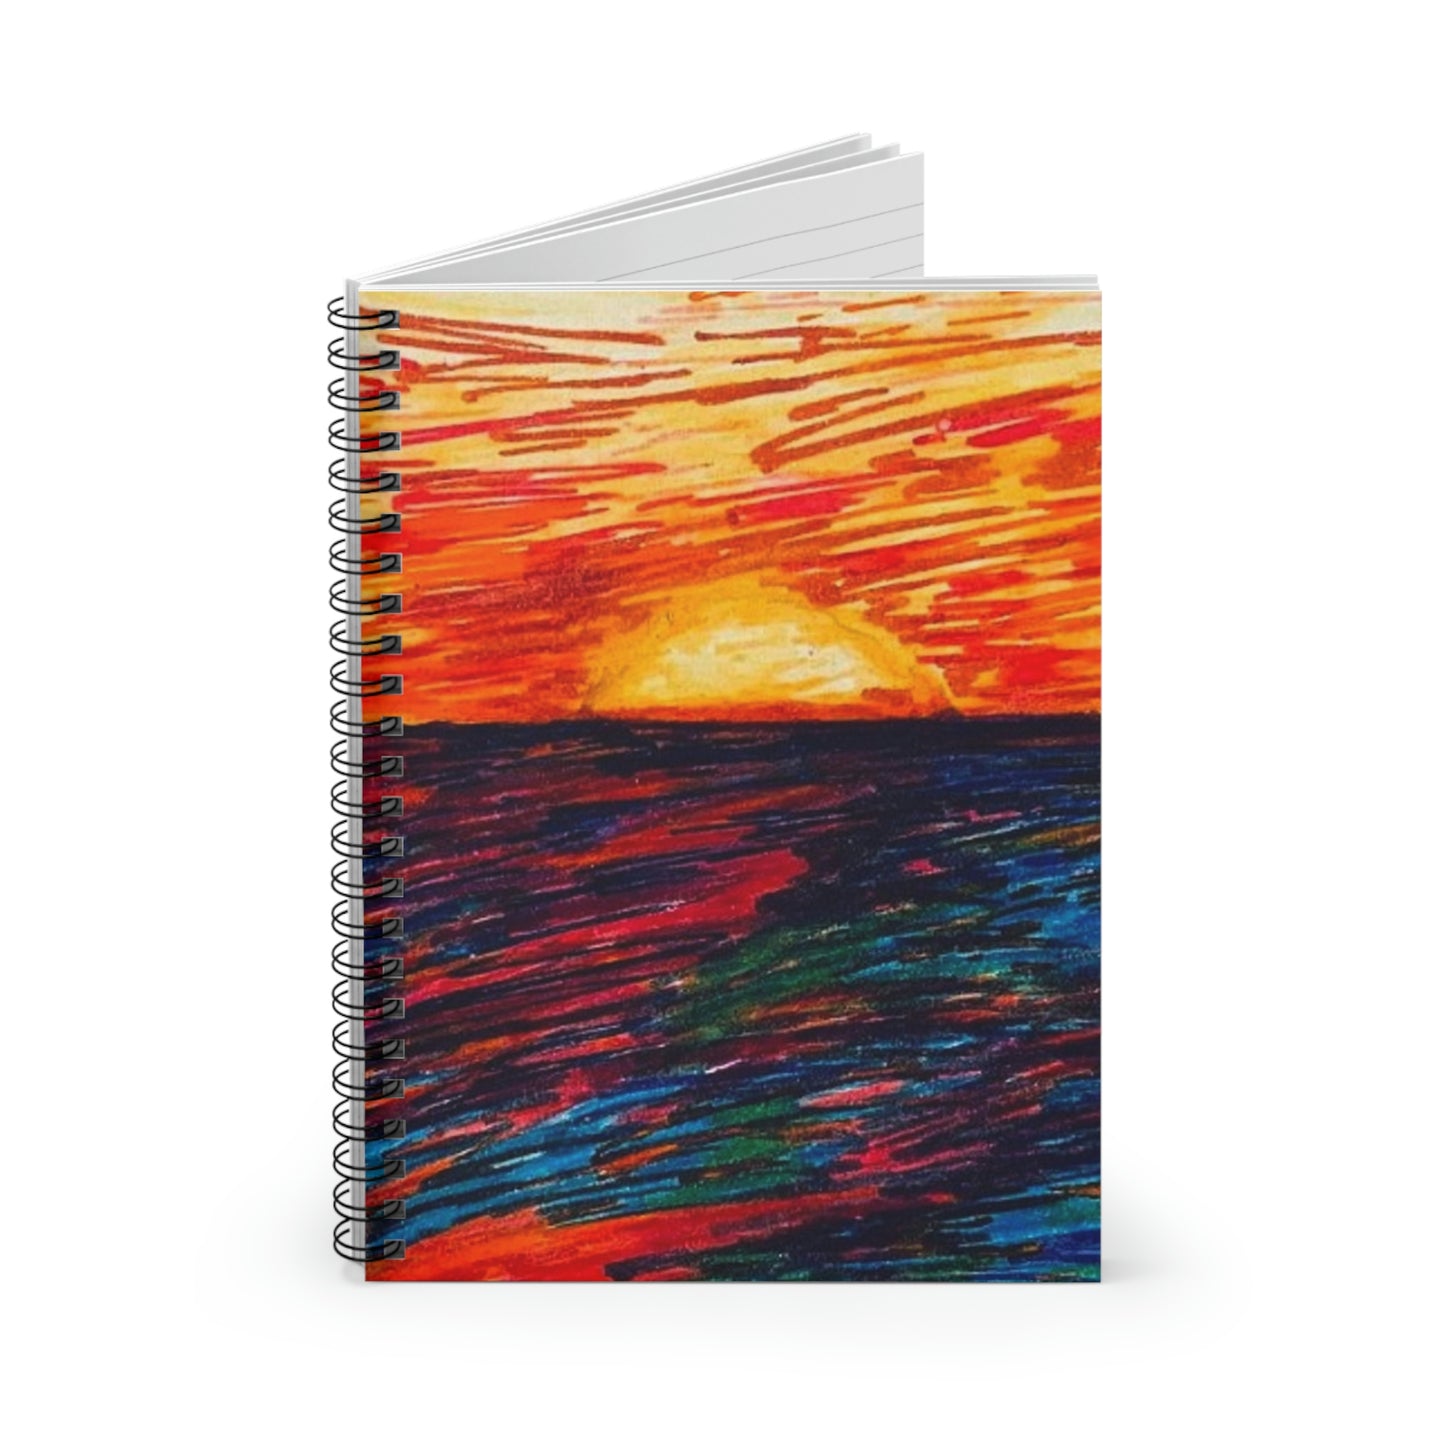 Primary Rise Spiral Notebook - Ruled Line